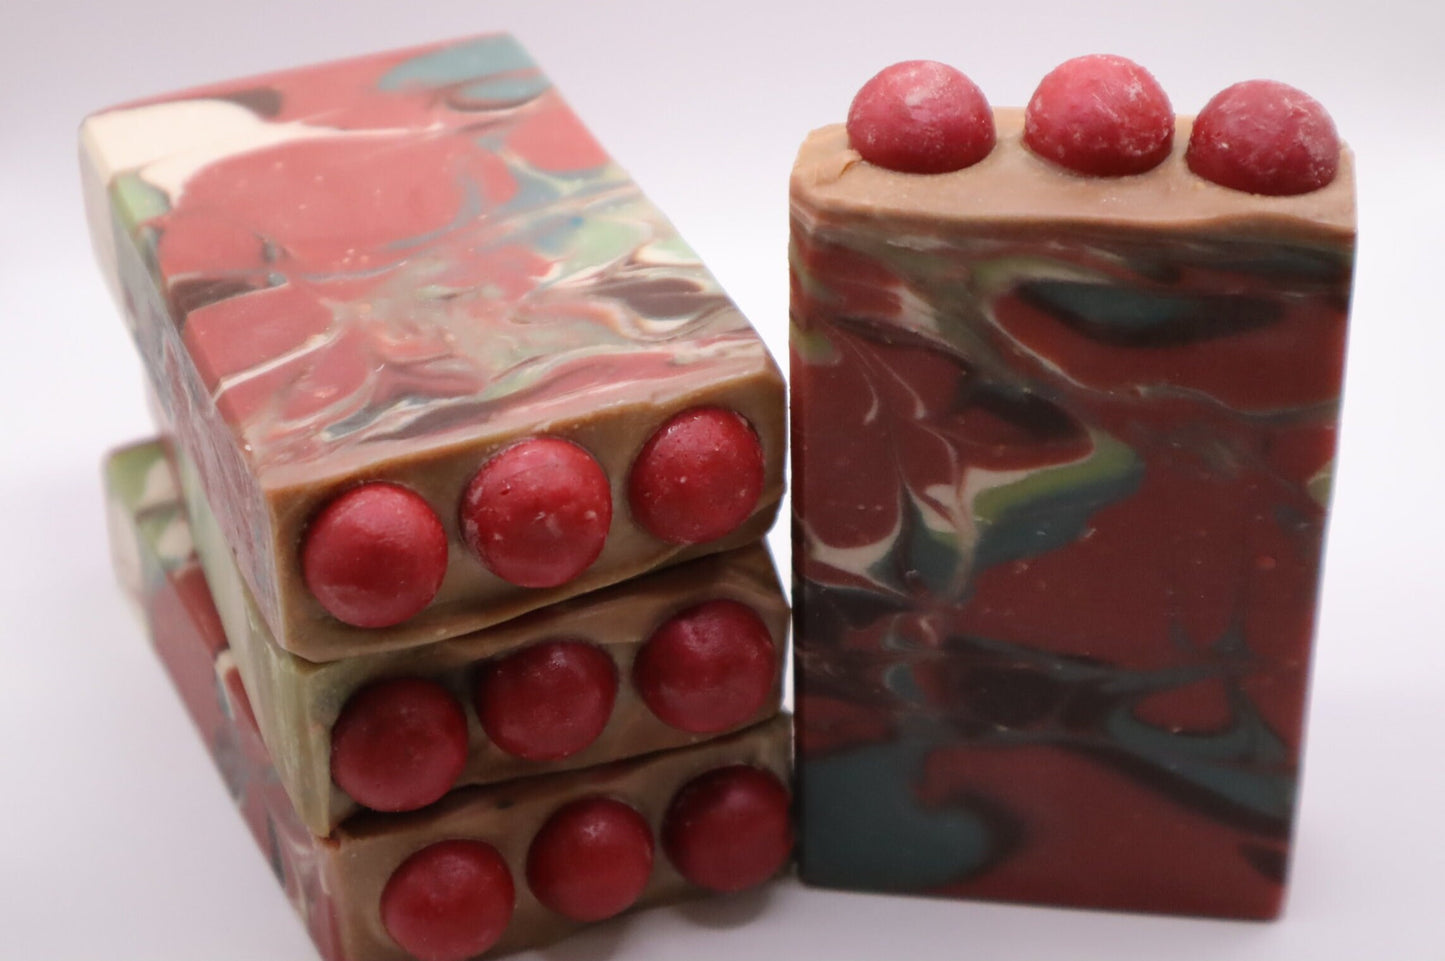 Cherry Almond Soap, Luxurious Sudsy lather that cleans and smells so good you'll want to use it everyday!  5.0 oz.